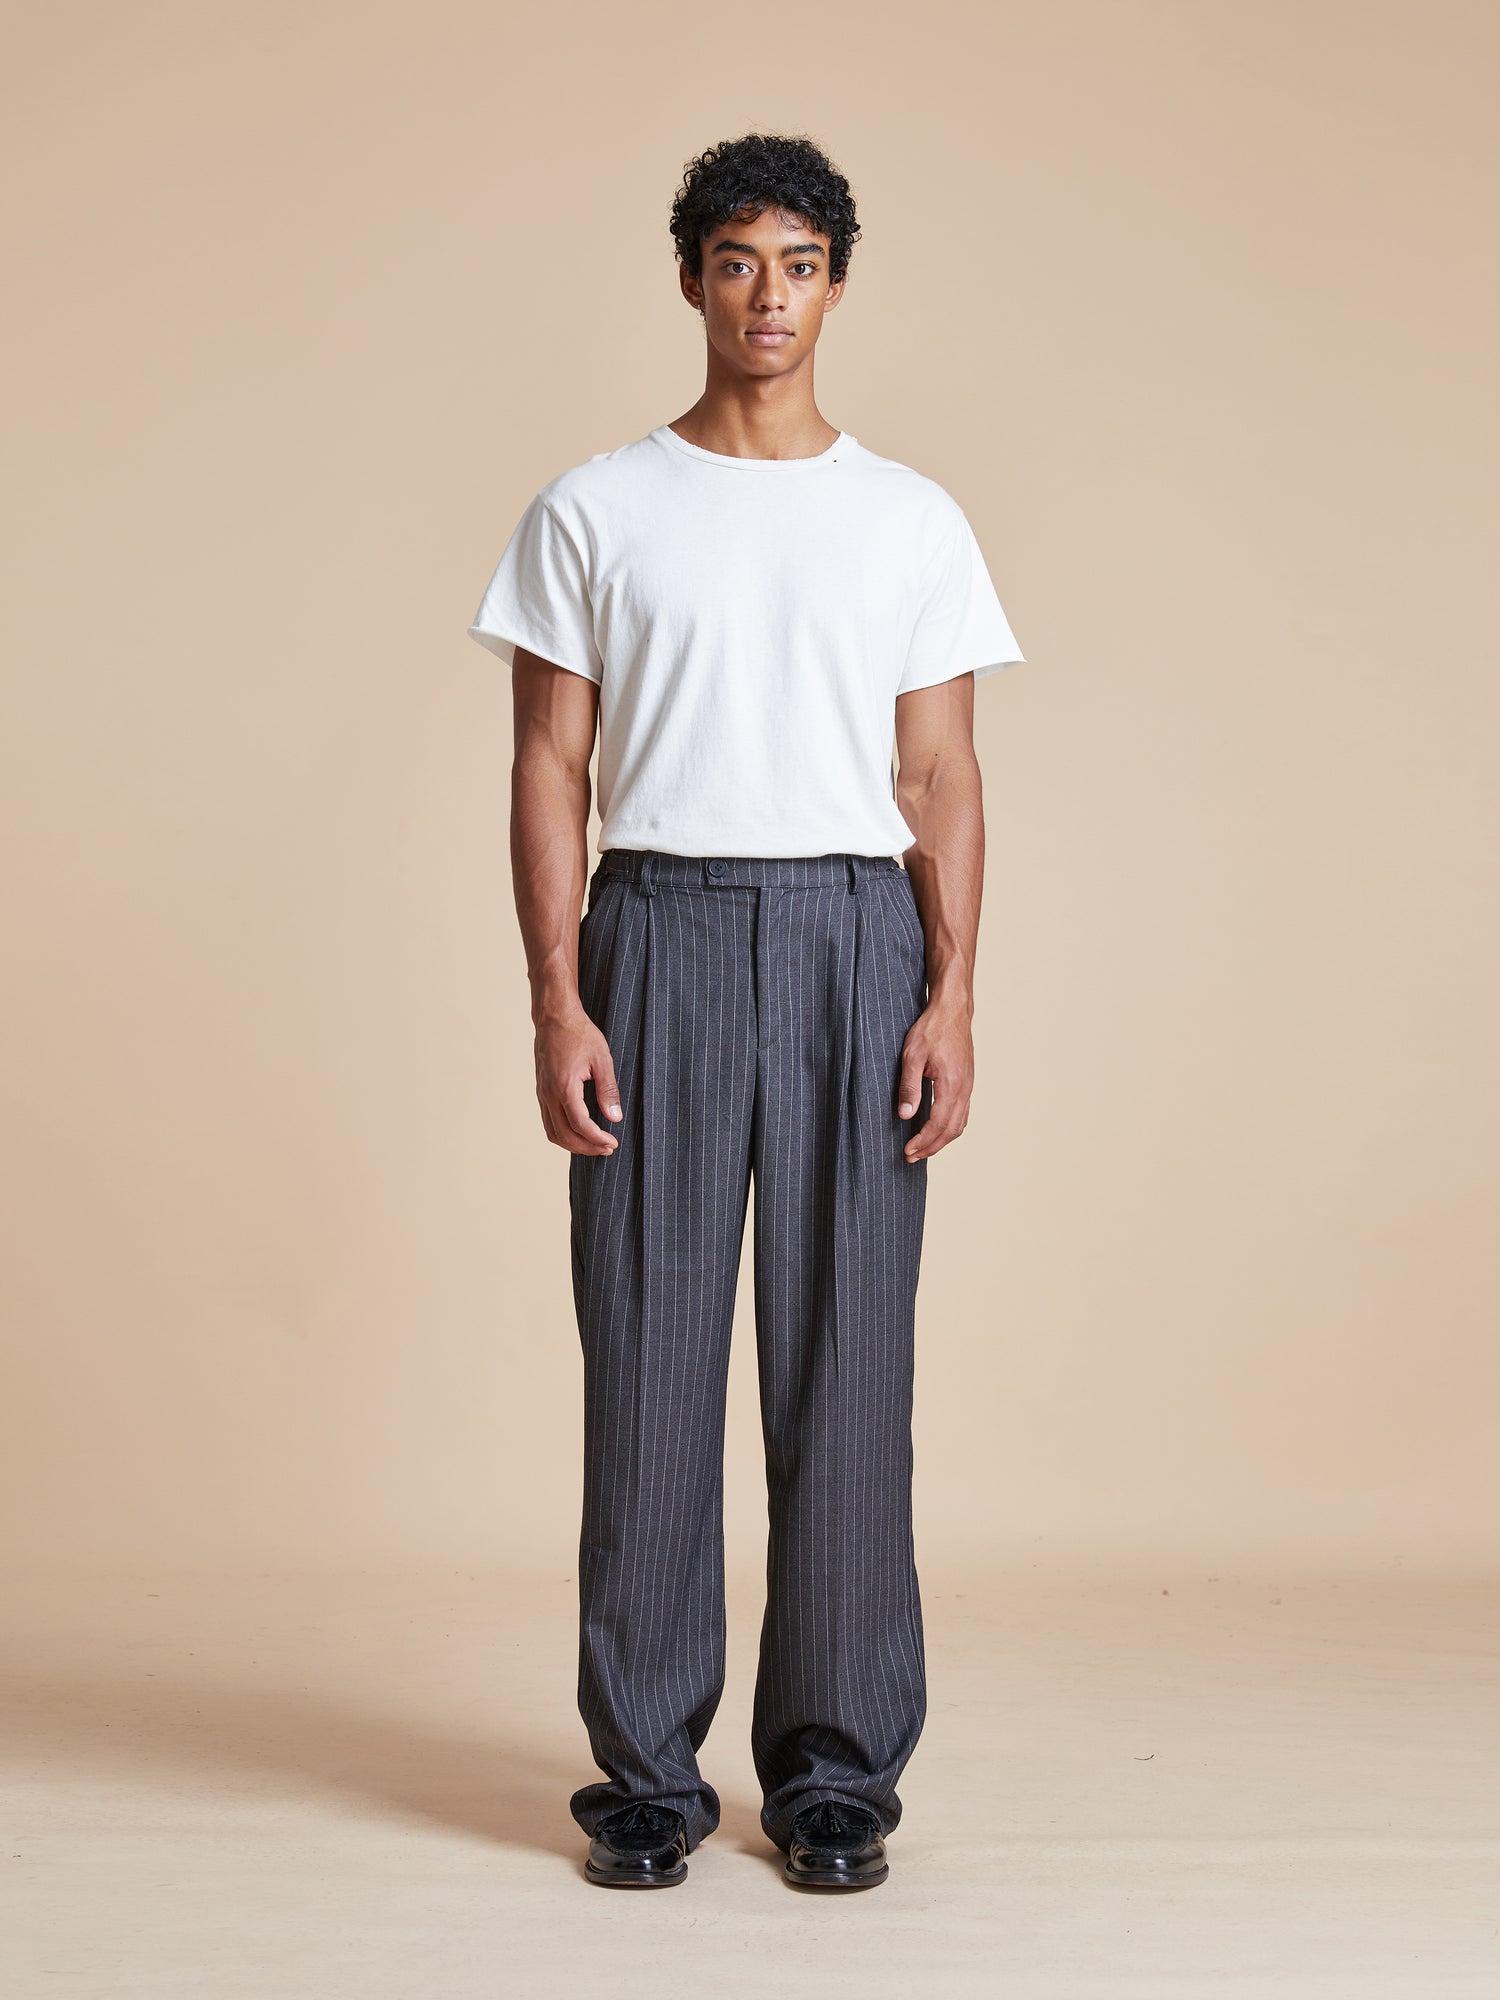 The model is wearing a white t-shirt and grey Found Pinstripe Pleated Trousers.